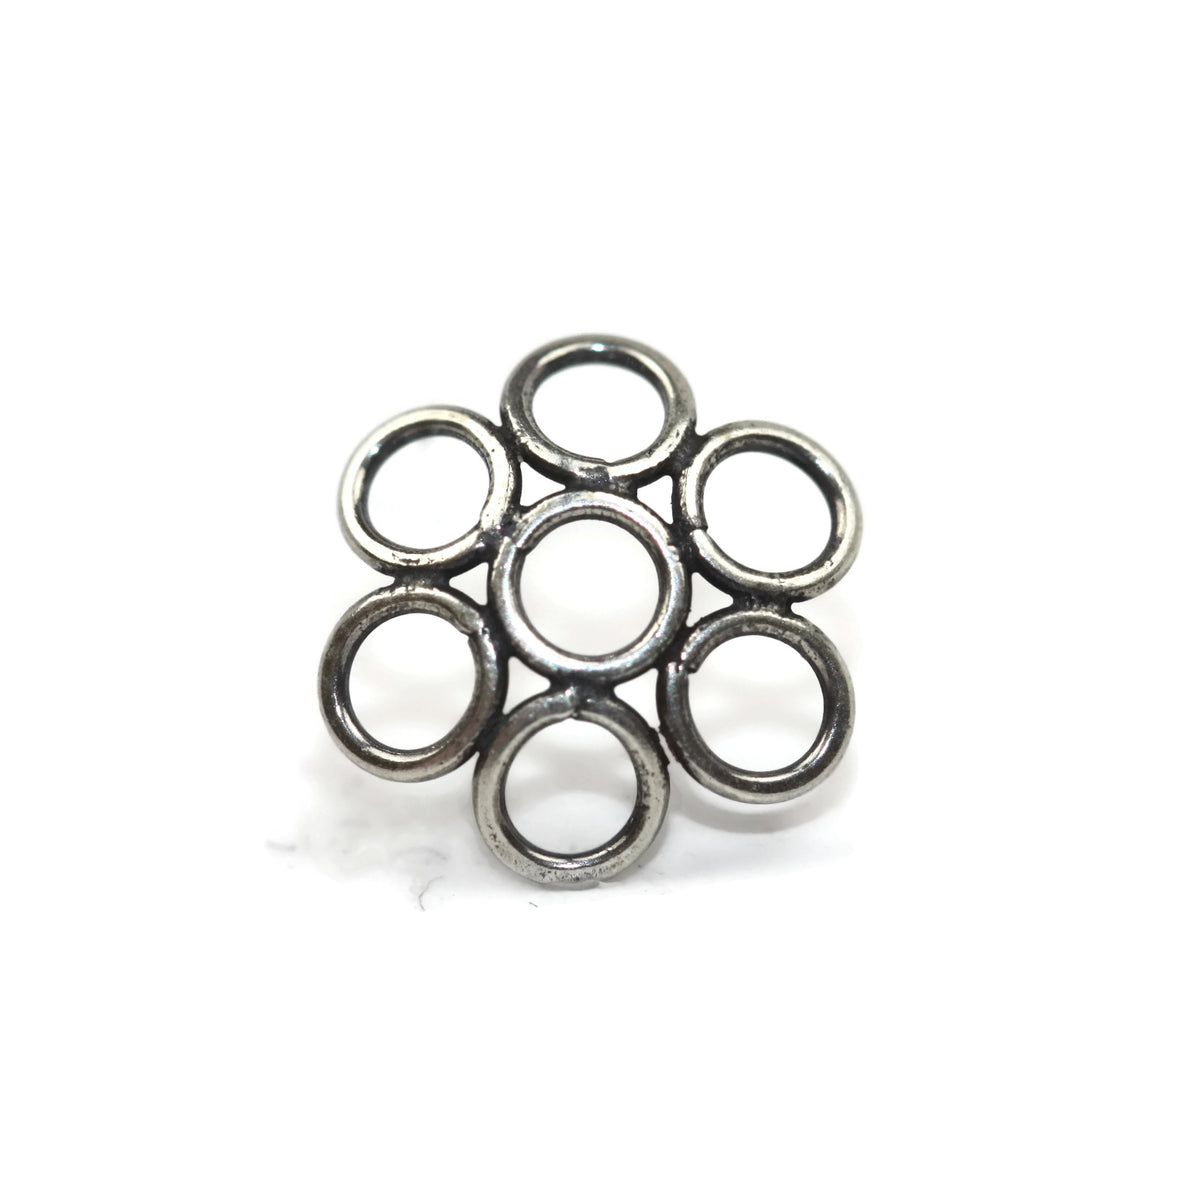 Bali Bead Sterling Silver Wire Spacer Bead 2 x 8 mm